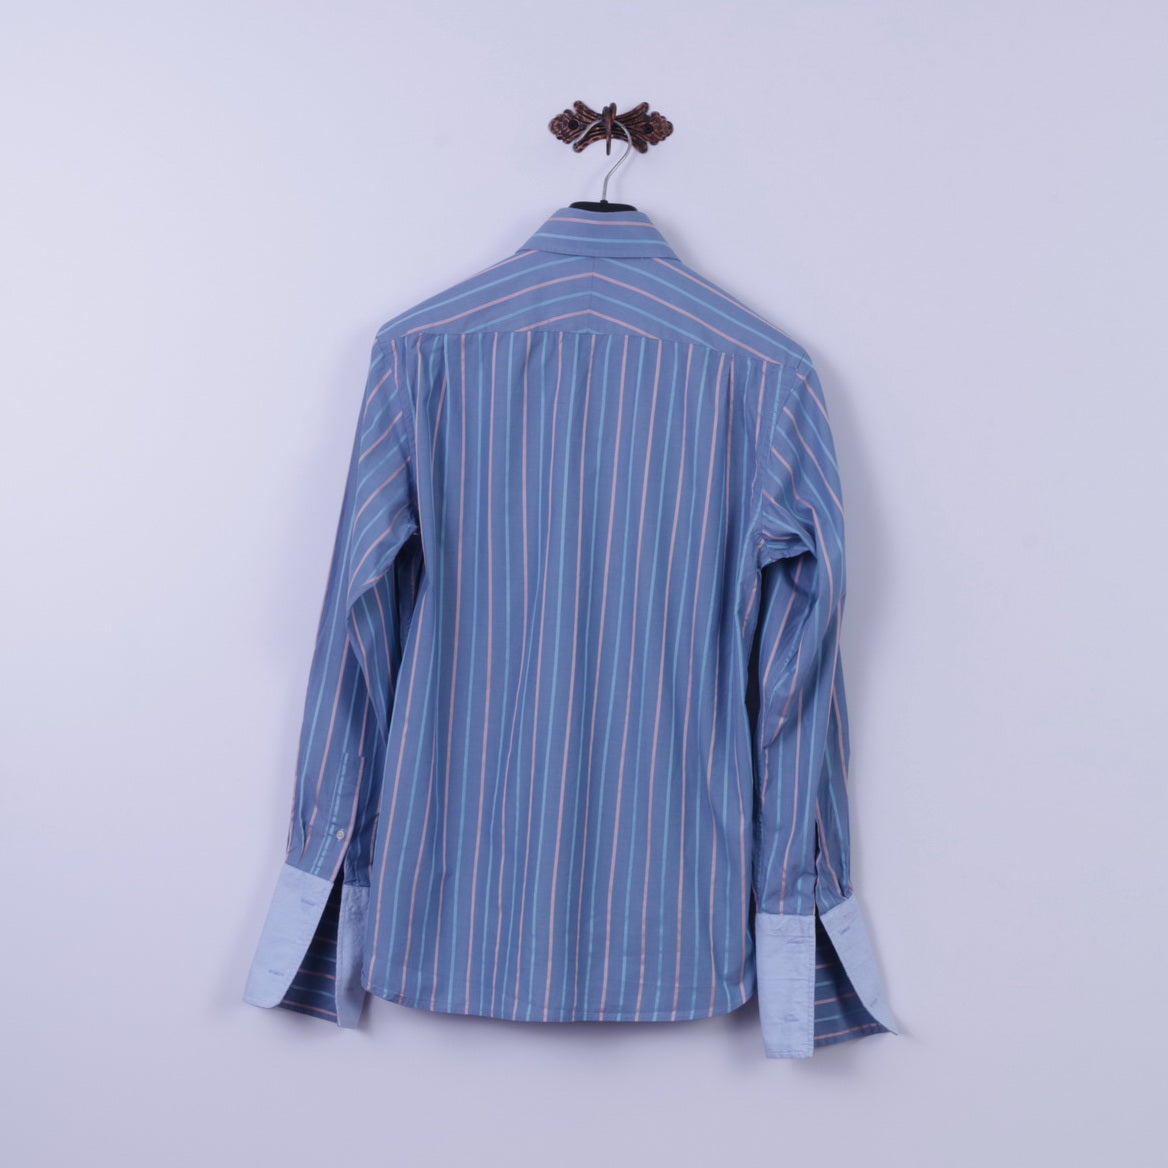 Ted Baker Mens 15.5 S Casual Shirt Blue Striped 100% Cototn Detailed Buttons Cuff Top